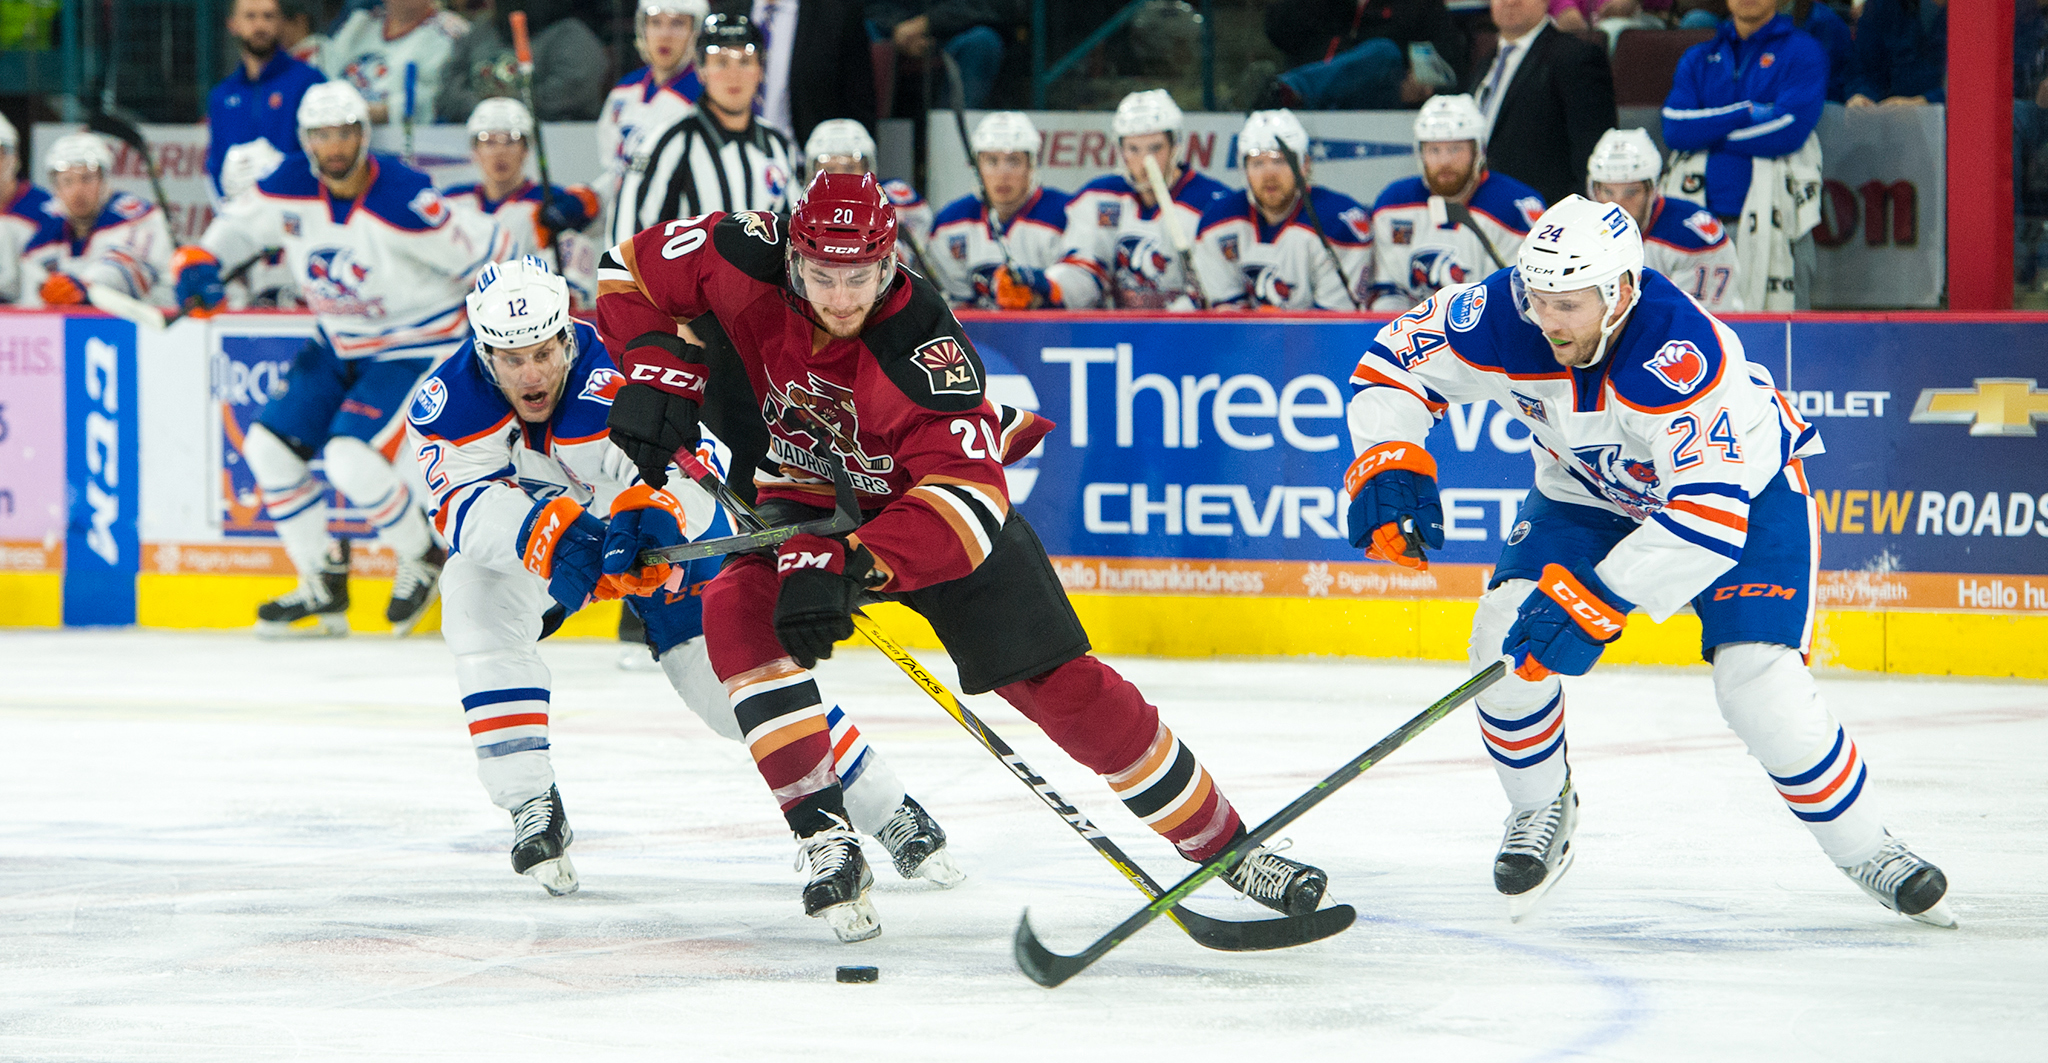 The Official Website of the Tucson Roadrunners: NEWS & STATS